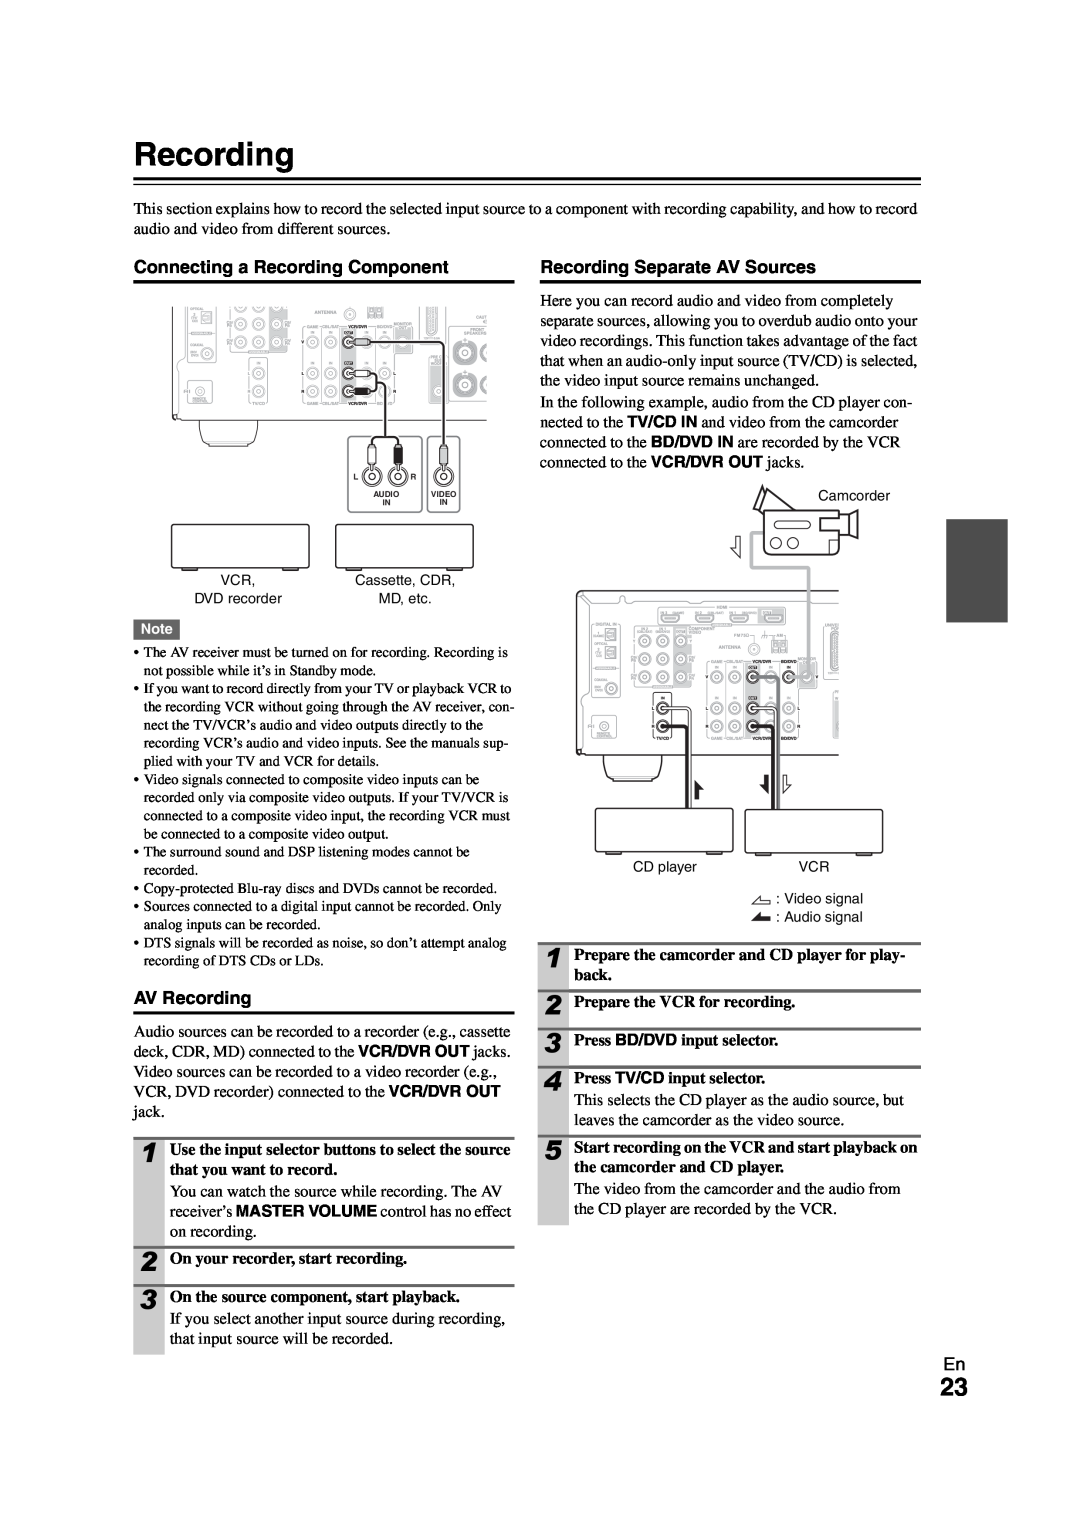 Onkyo 29400468 instruction manual Connecting a Recording Component, AV Recording 